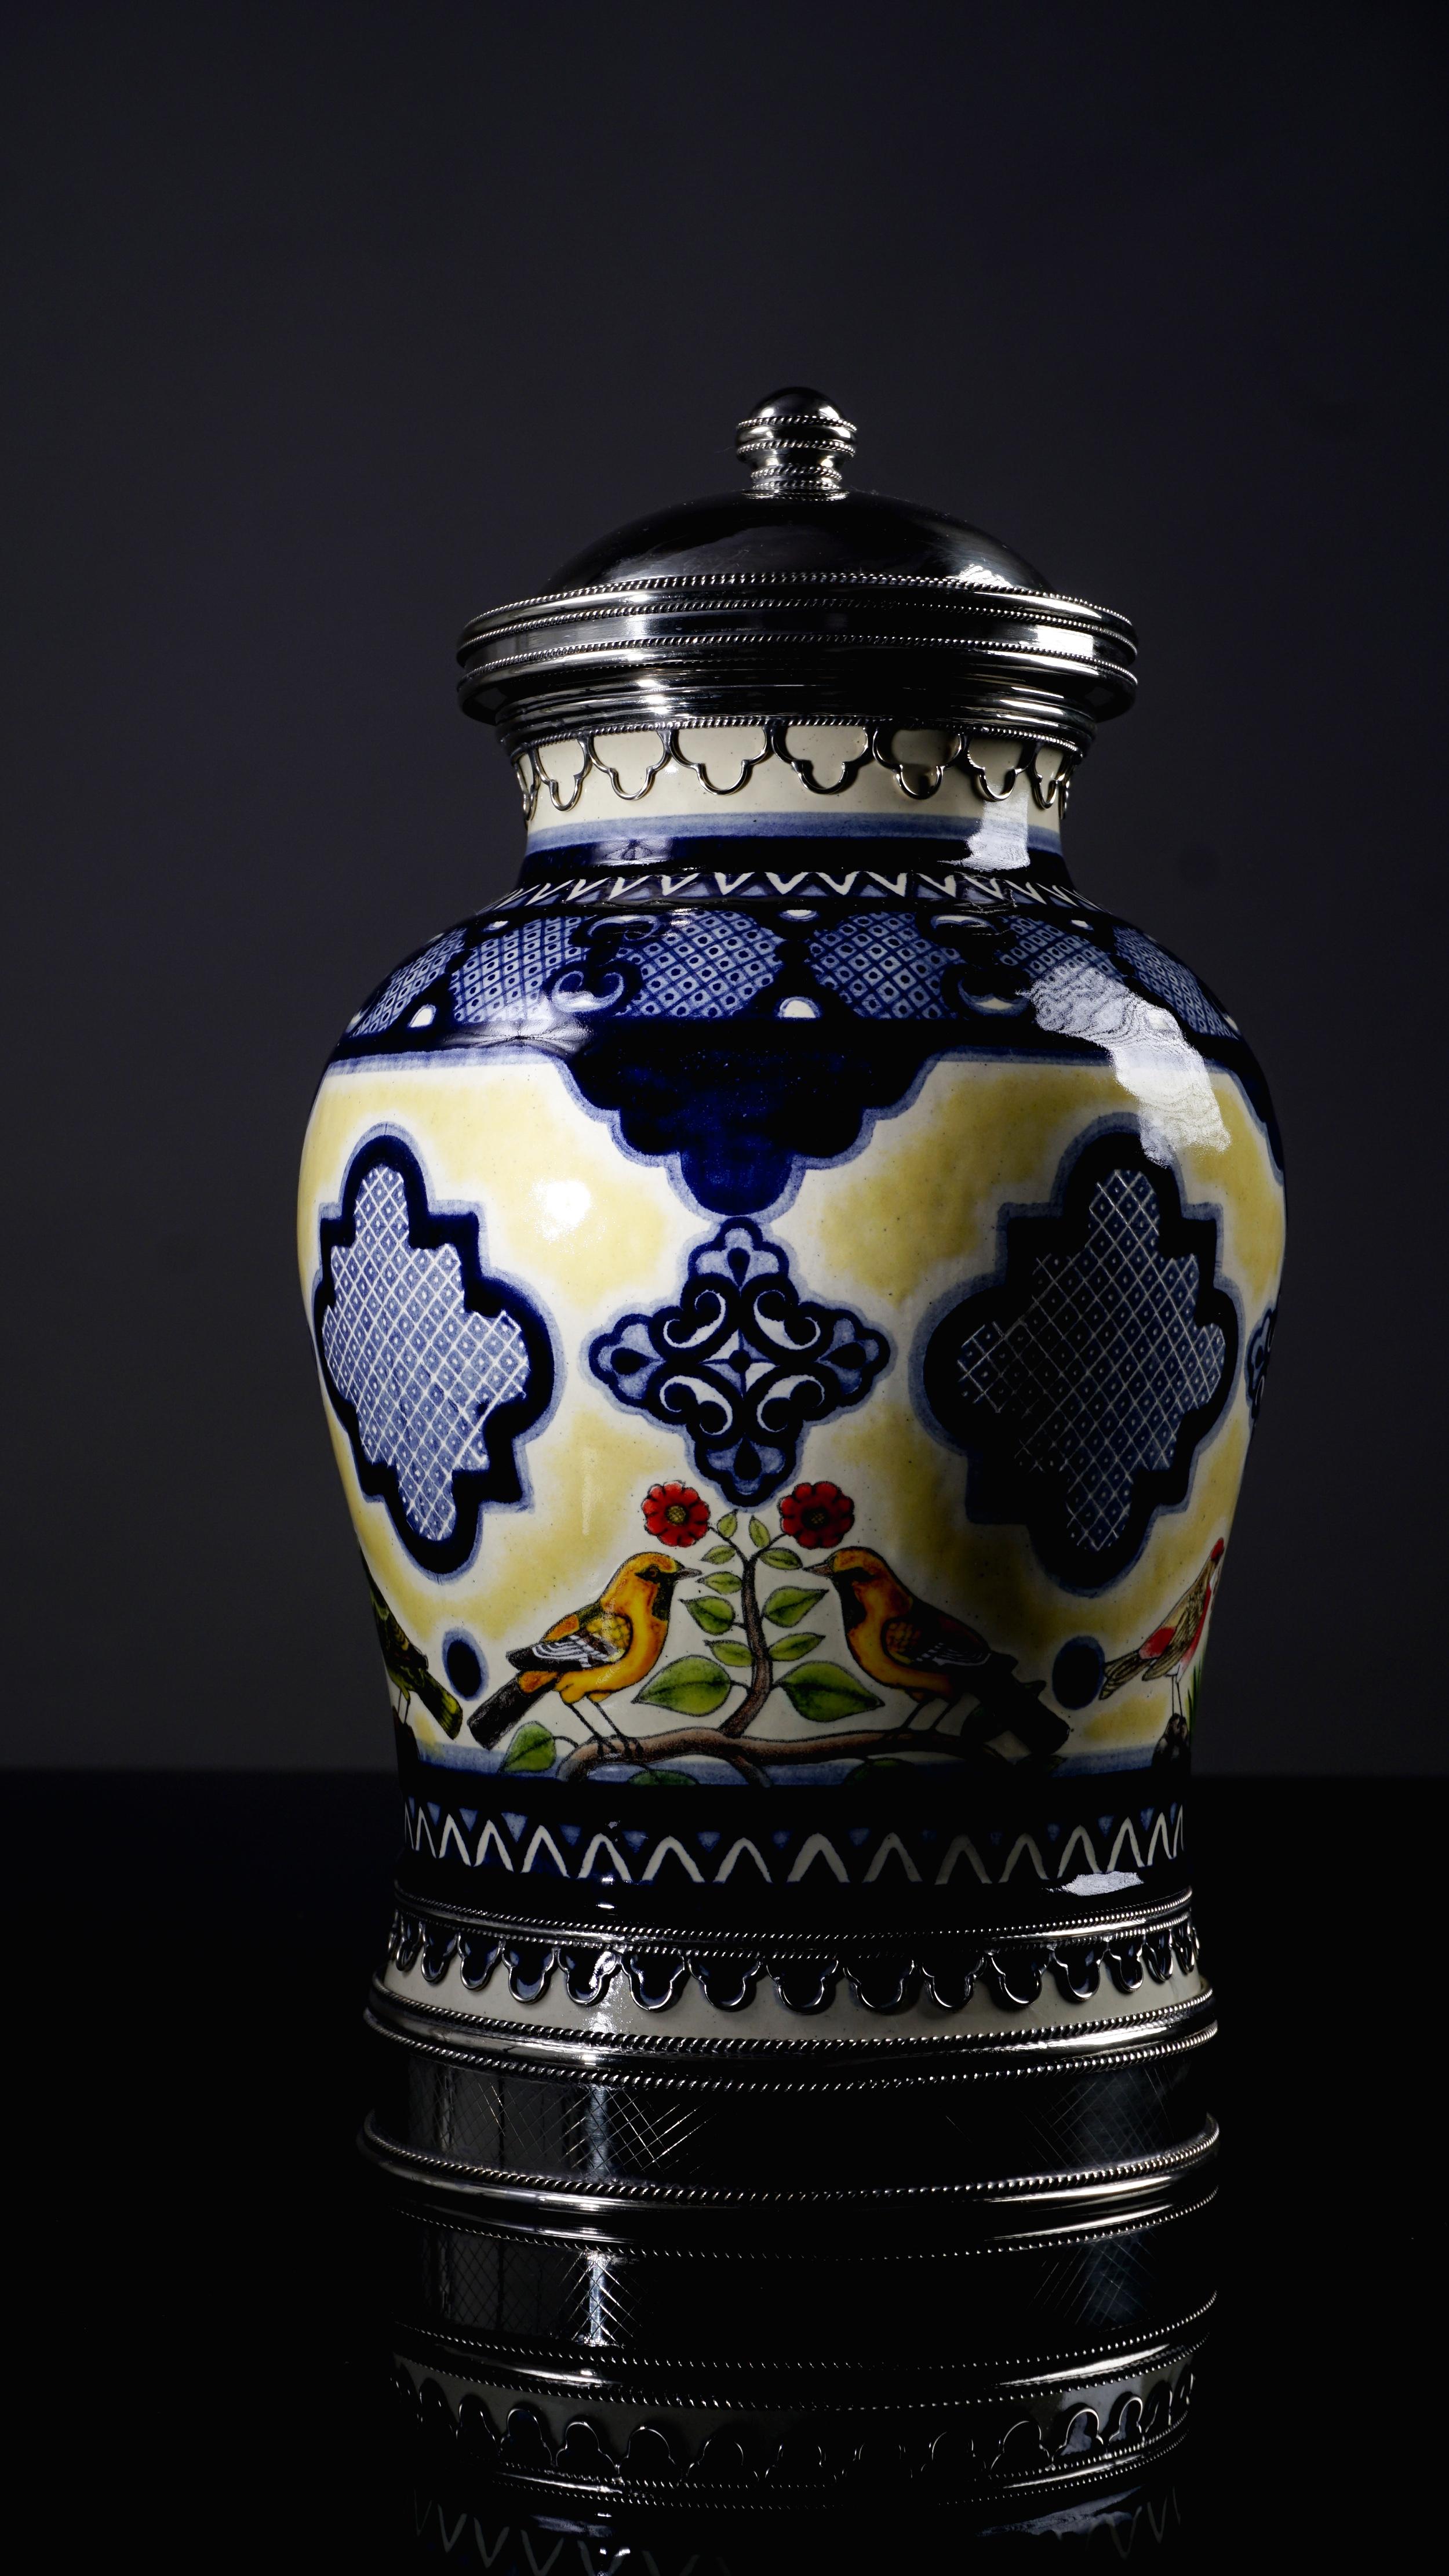 Mexican Ceramic and White Metal 'Alpaca' Jar with Hand Painted Motives